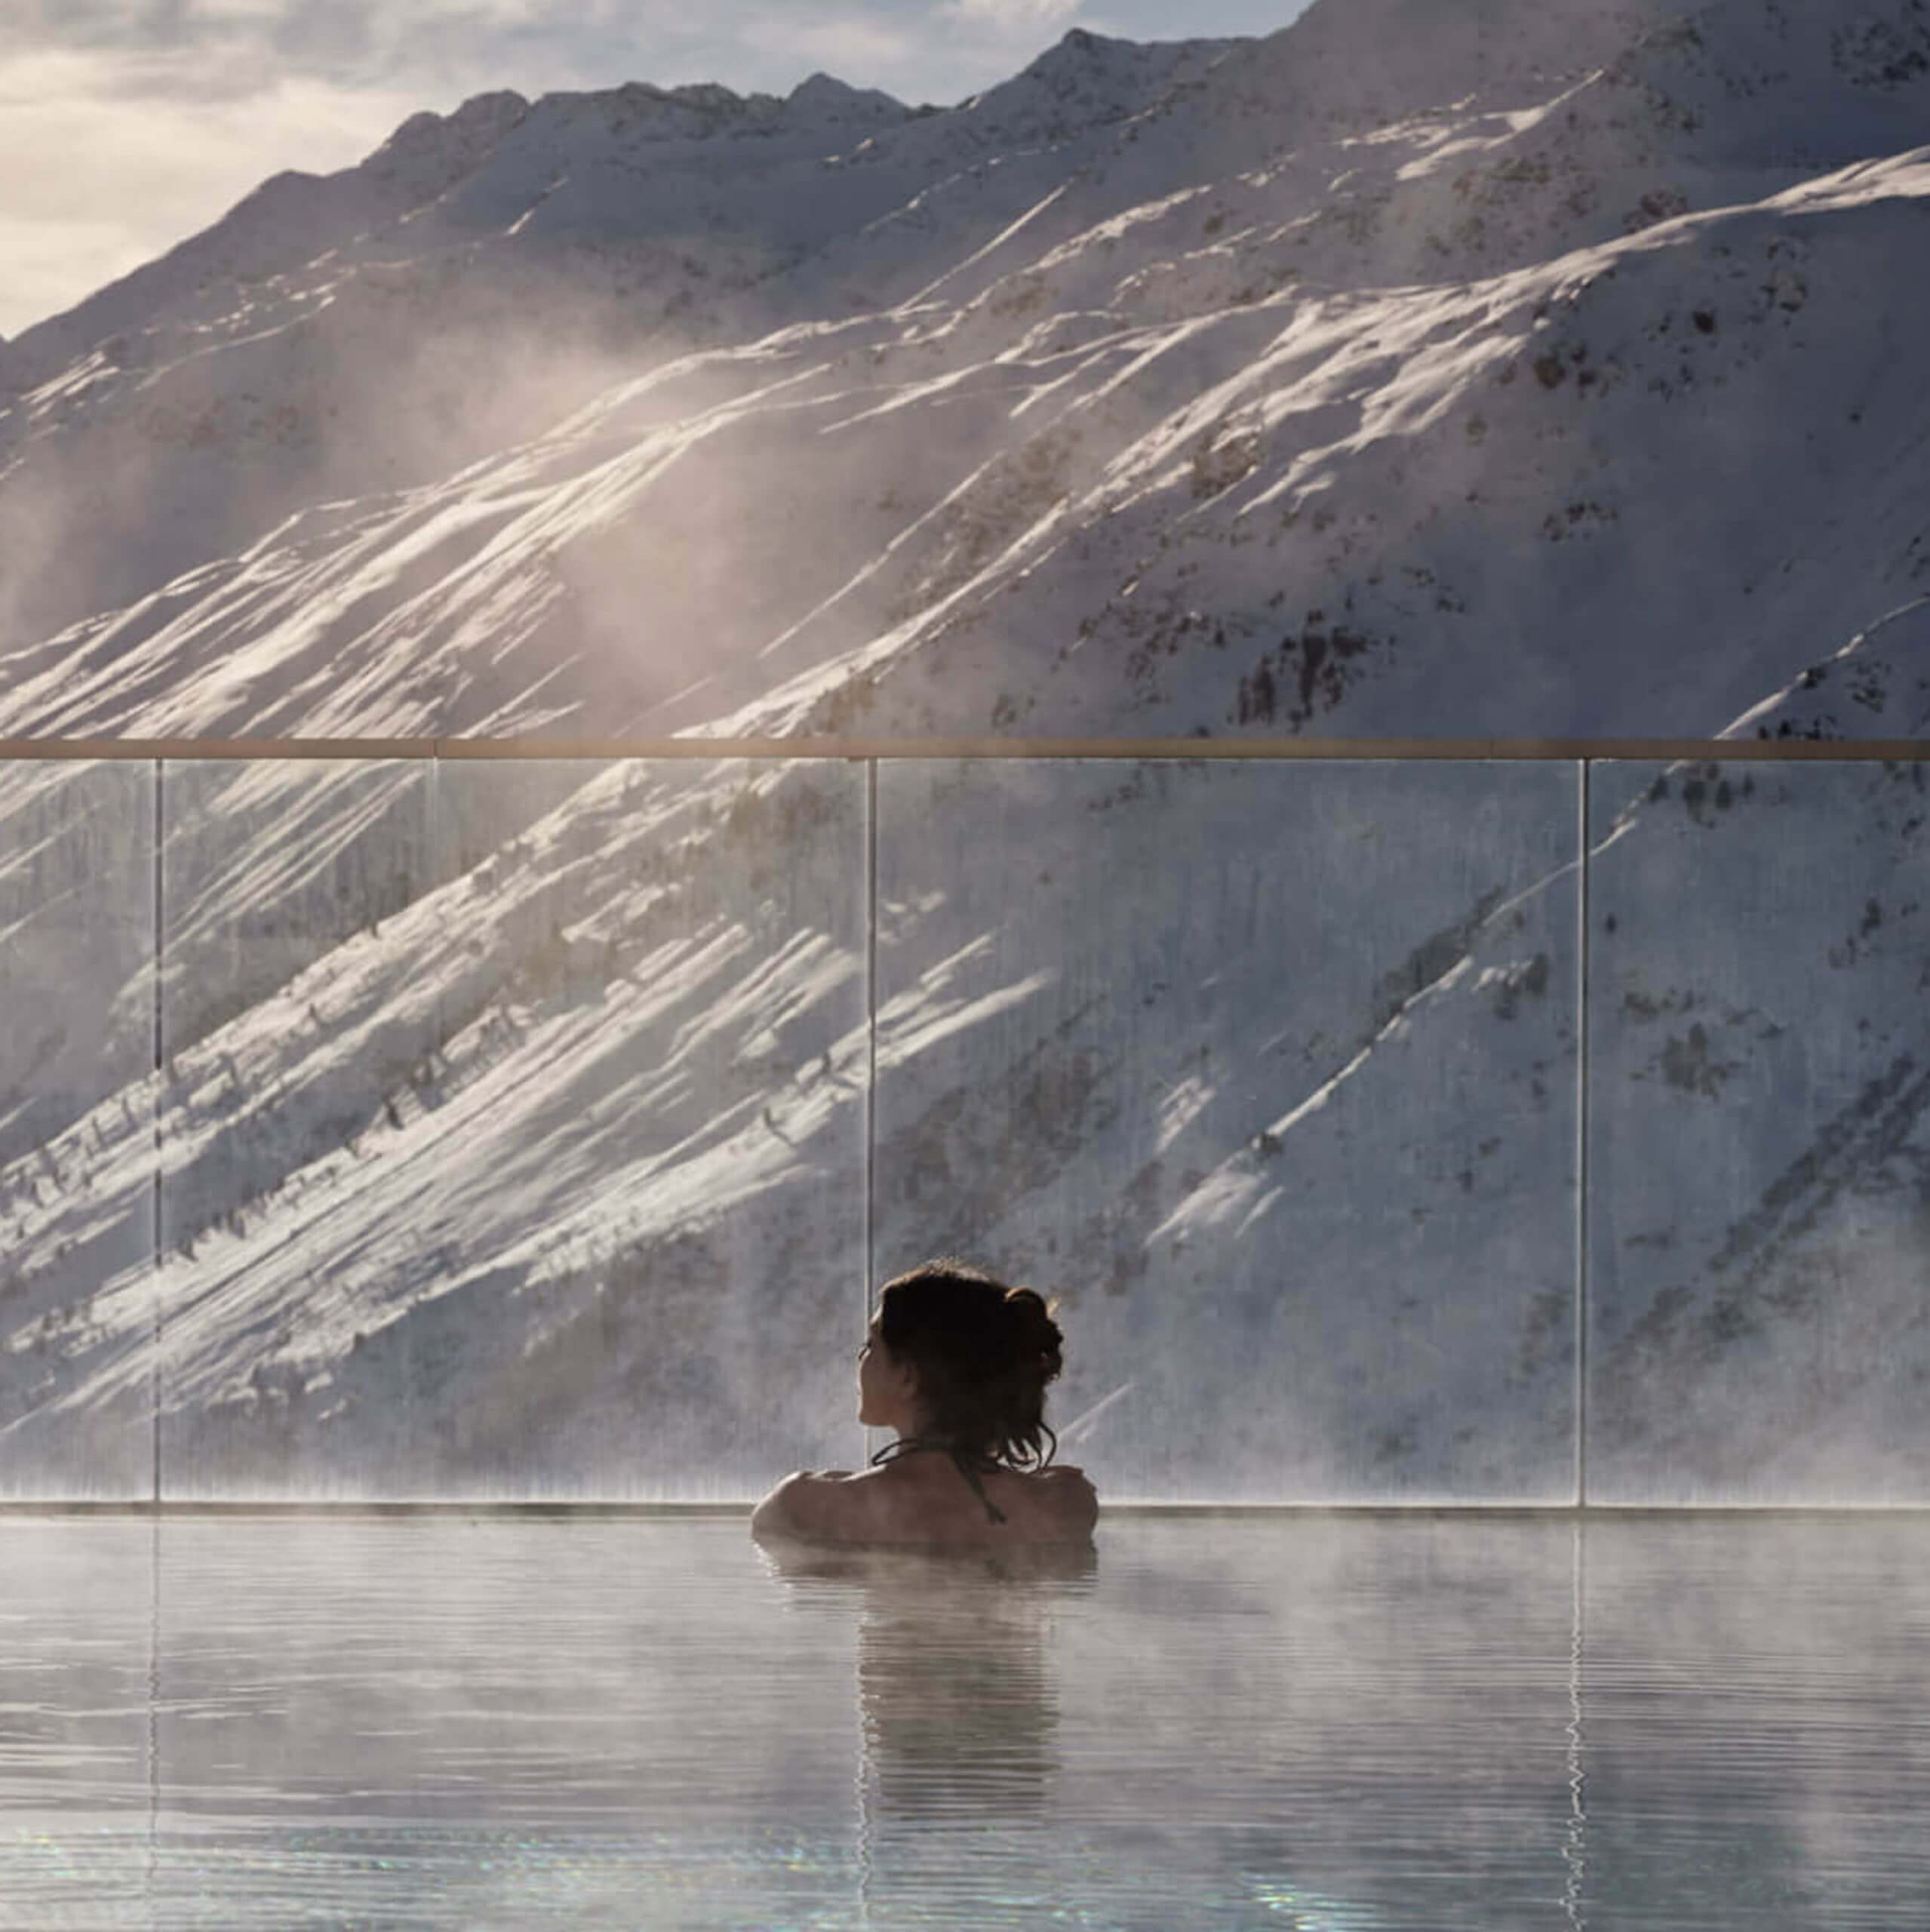 A woman swimming in a pool with a mountain in the background, possibly at a top hotel in Hochgurgl.